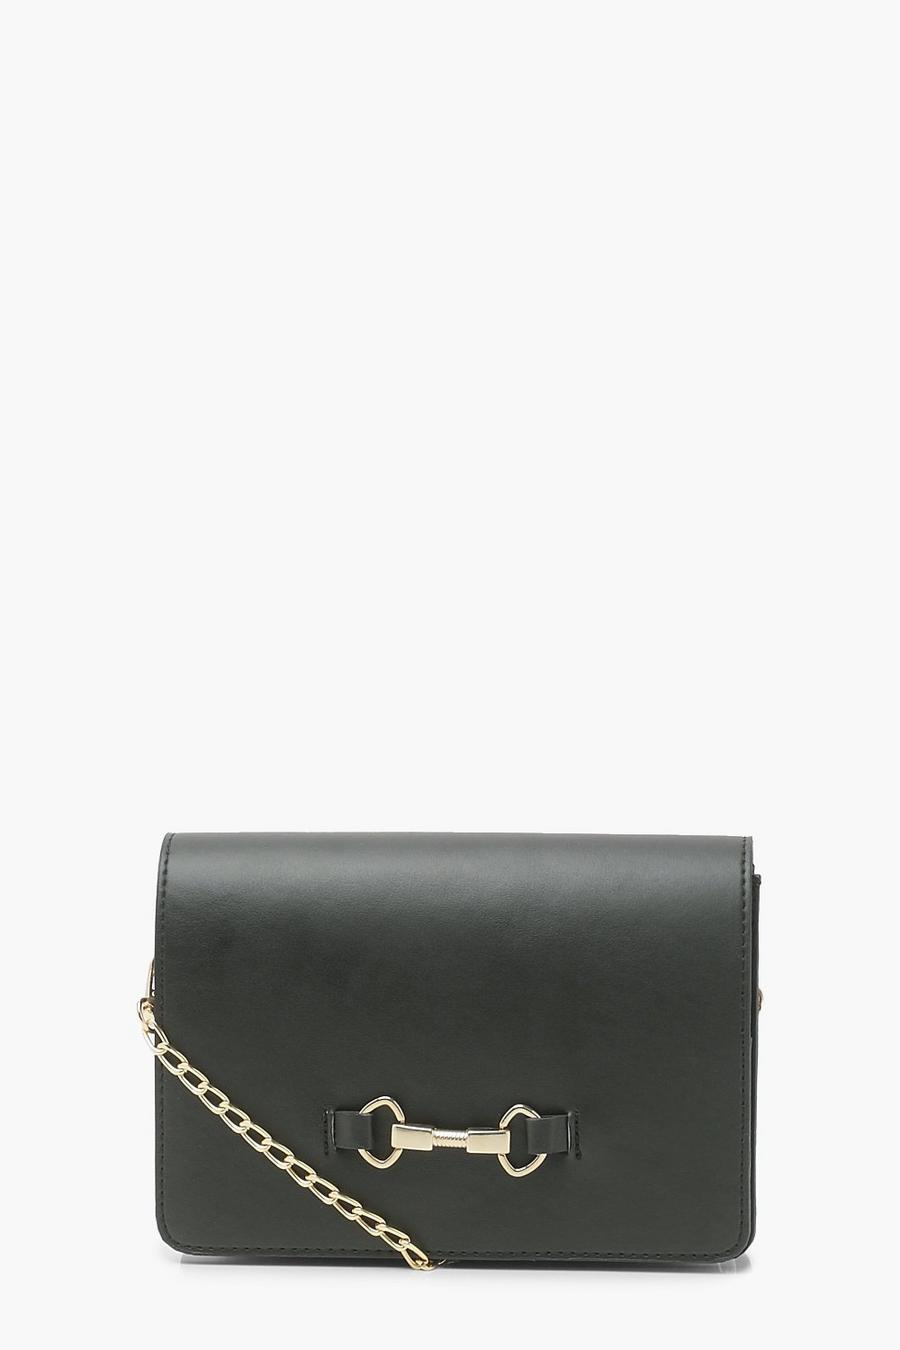 Black Cross Body Bag With Buckle Detail image number 1